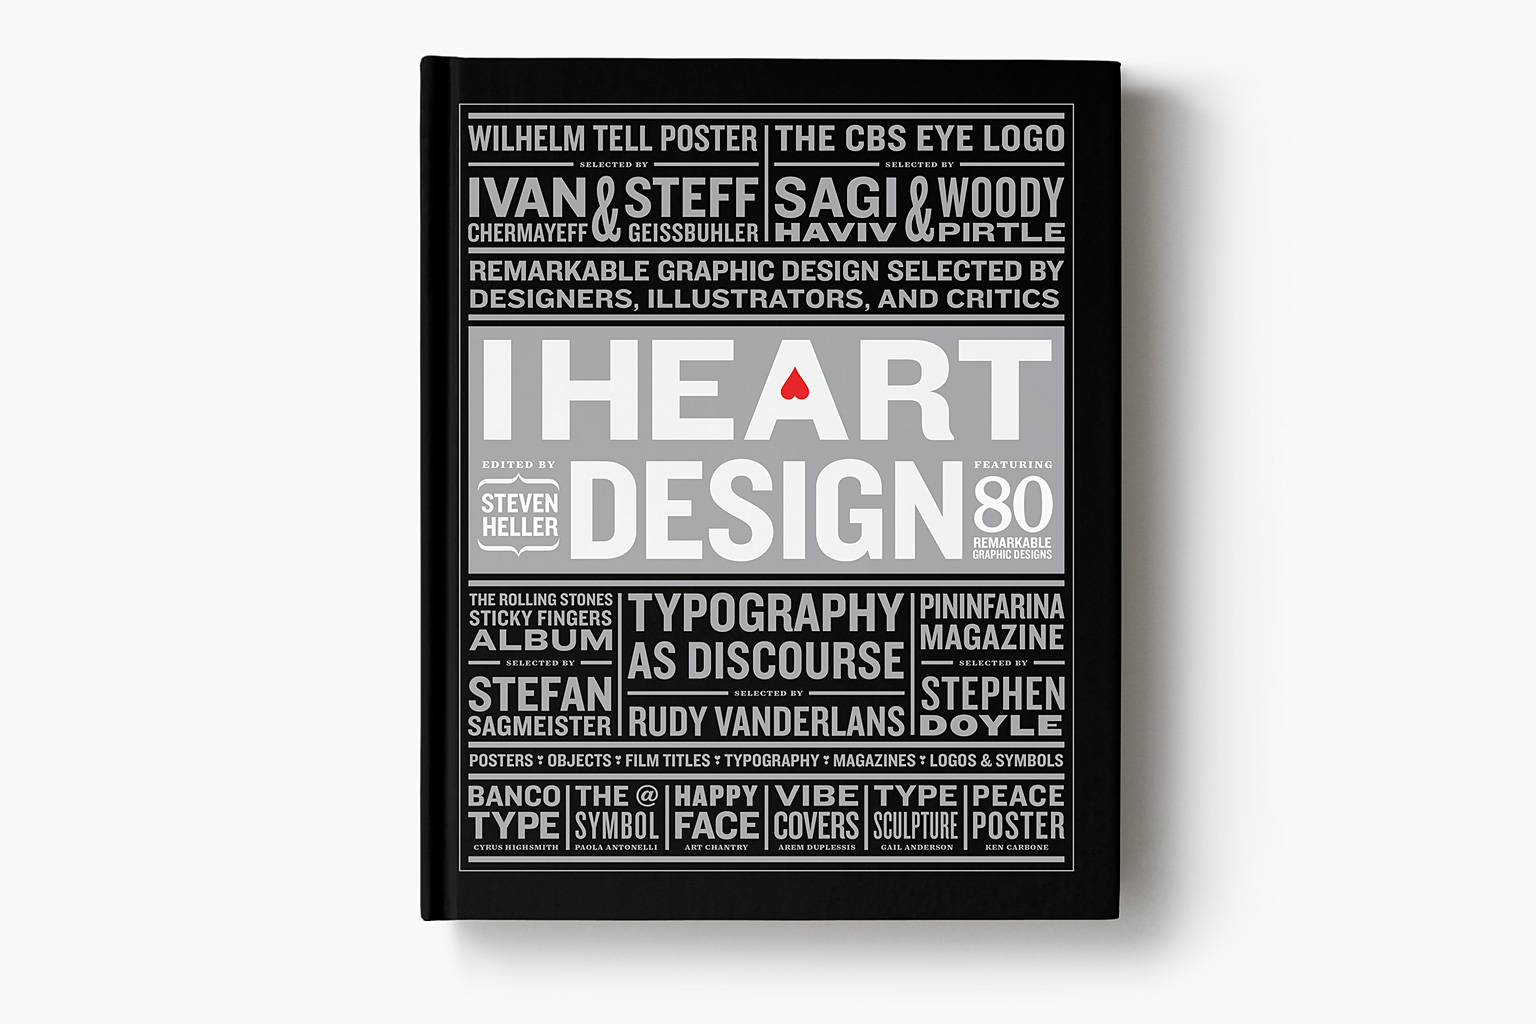 I Heart Design Book Cover Typography